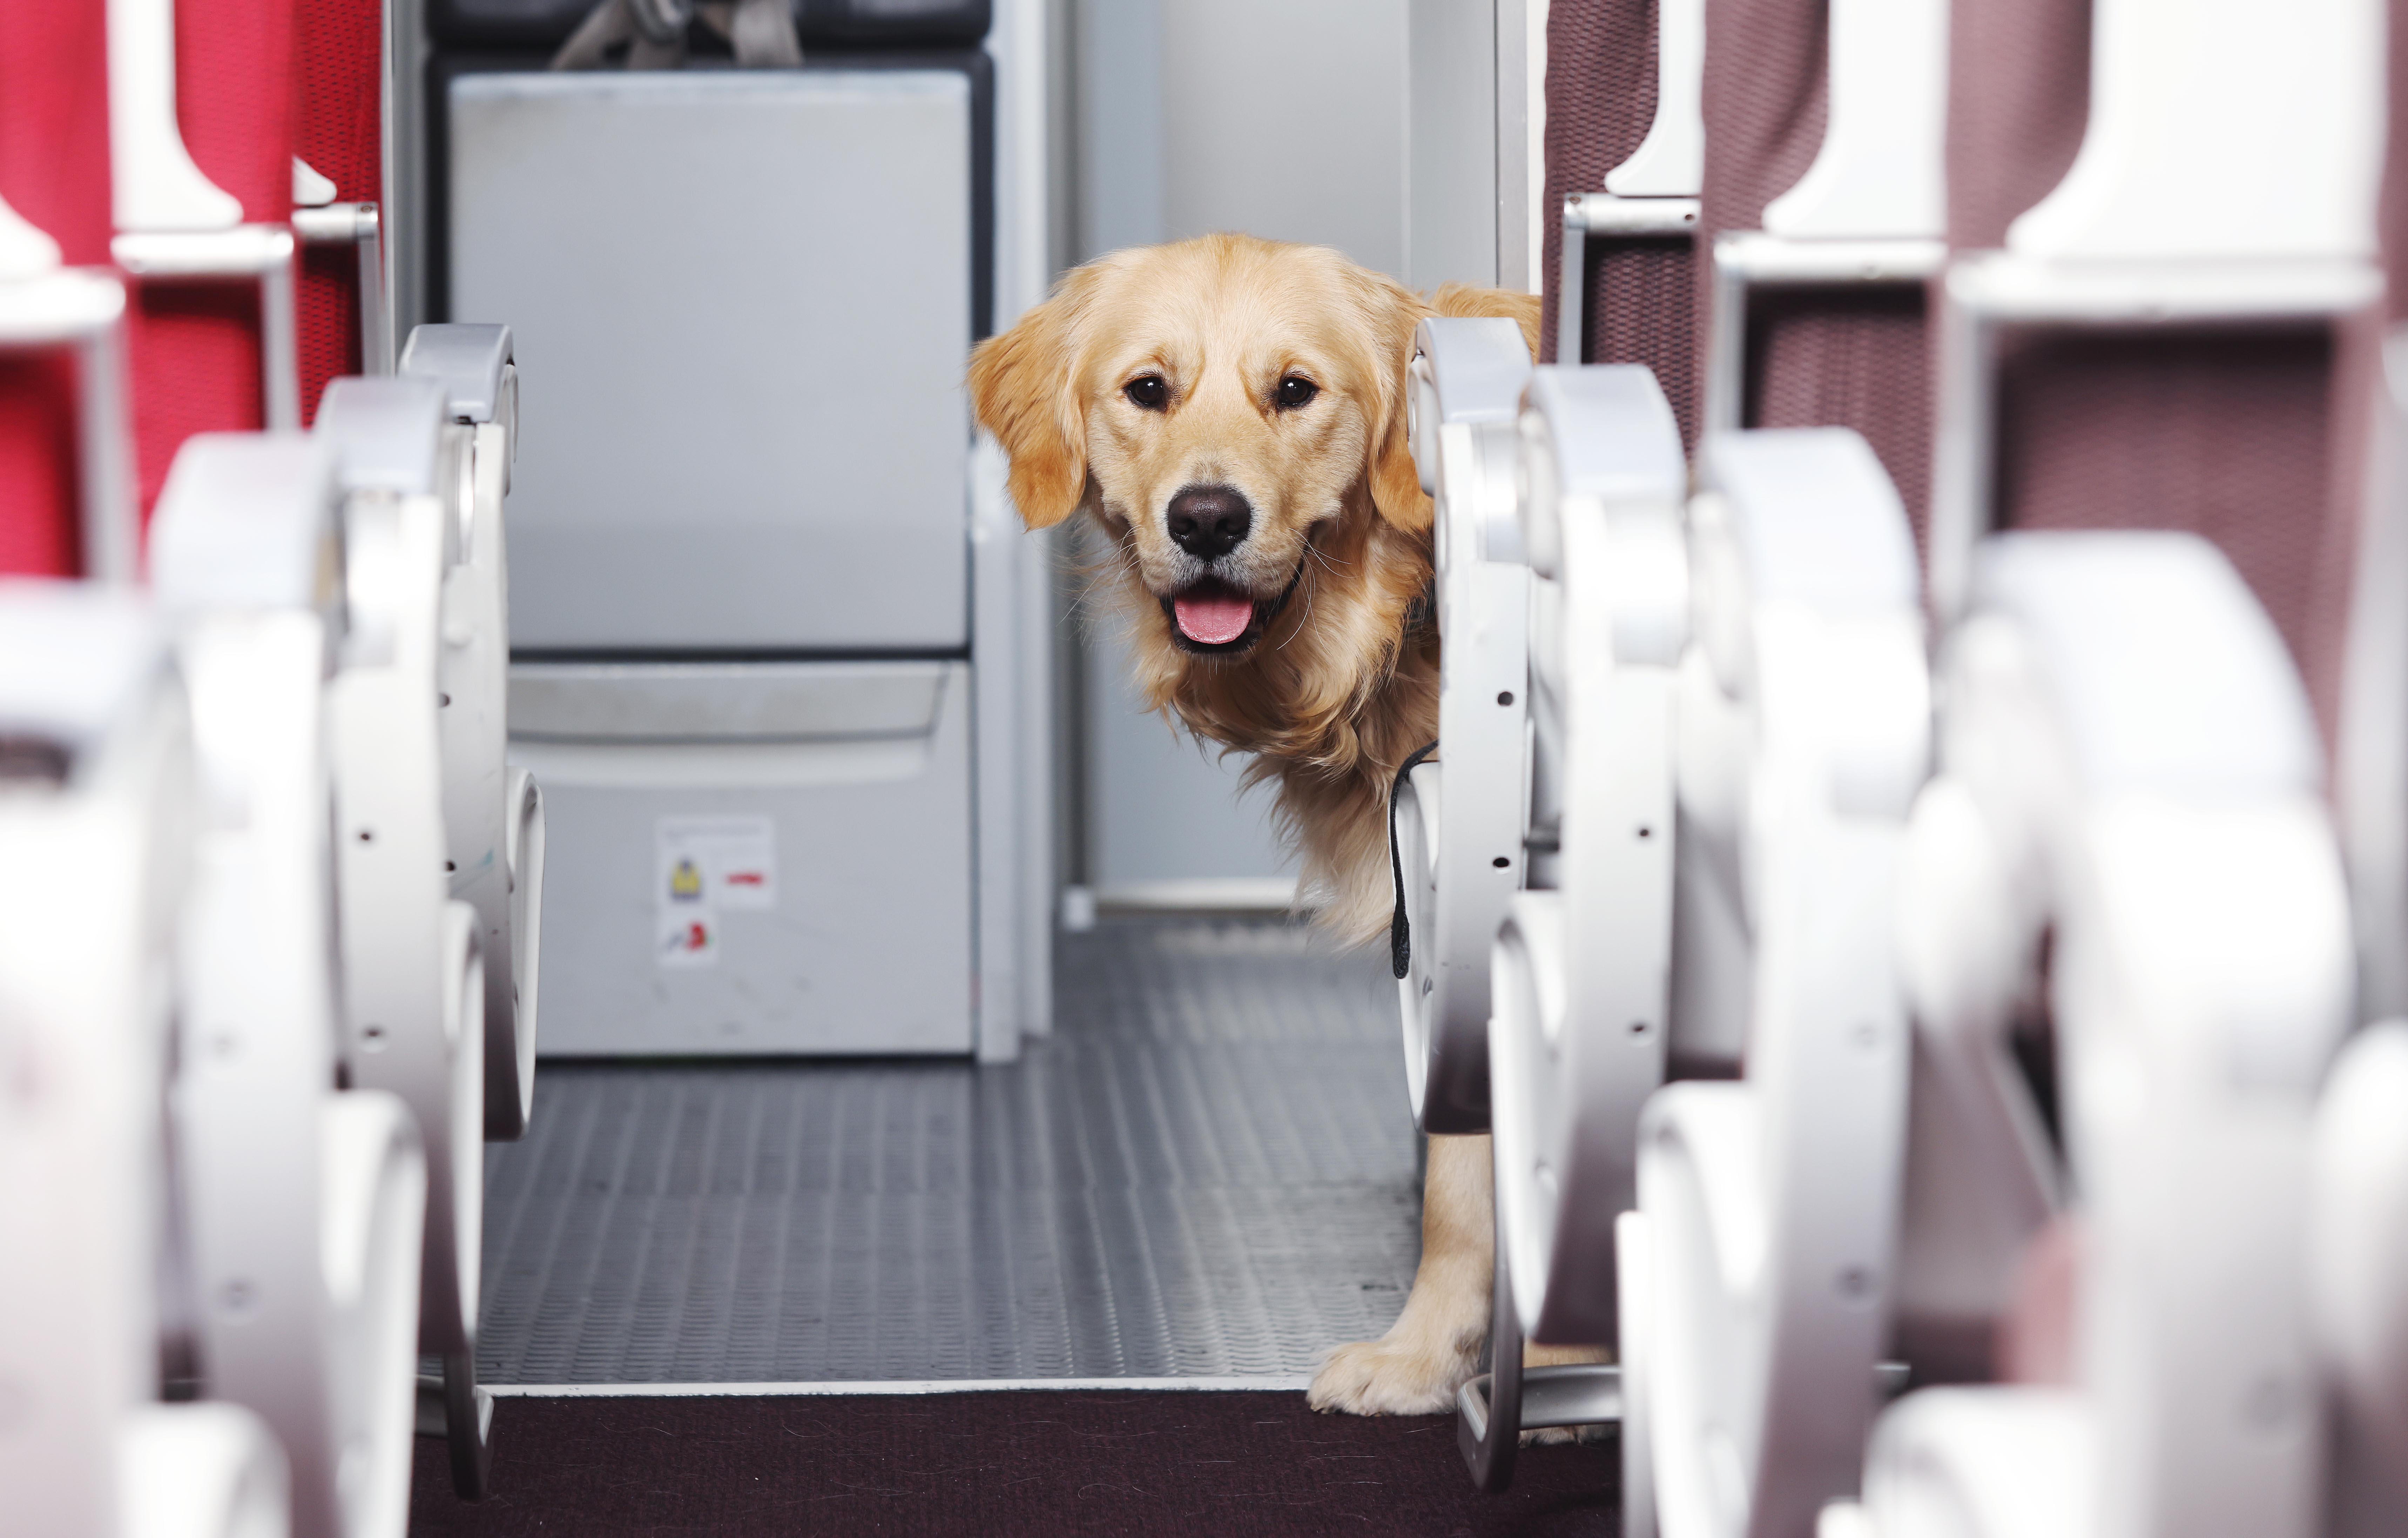 A guide dog in training on Virgin Atlantic’s training rig, looking around from the front row of seats down the aisle towards the camera. 